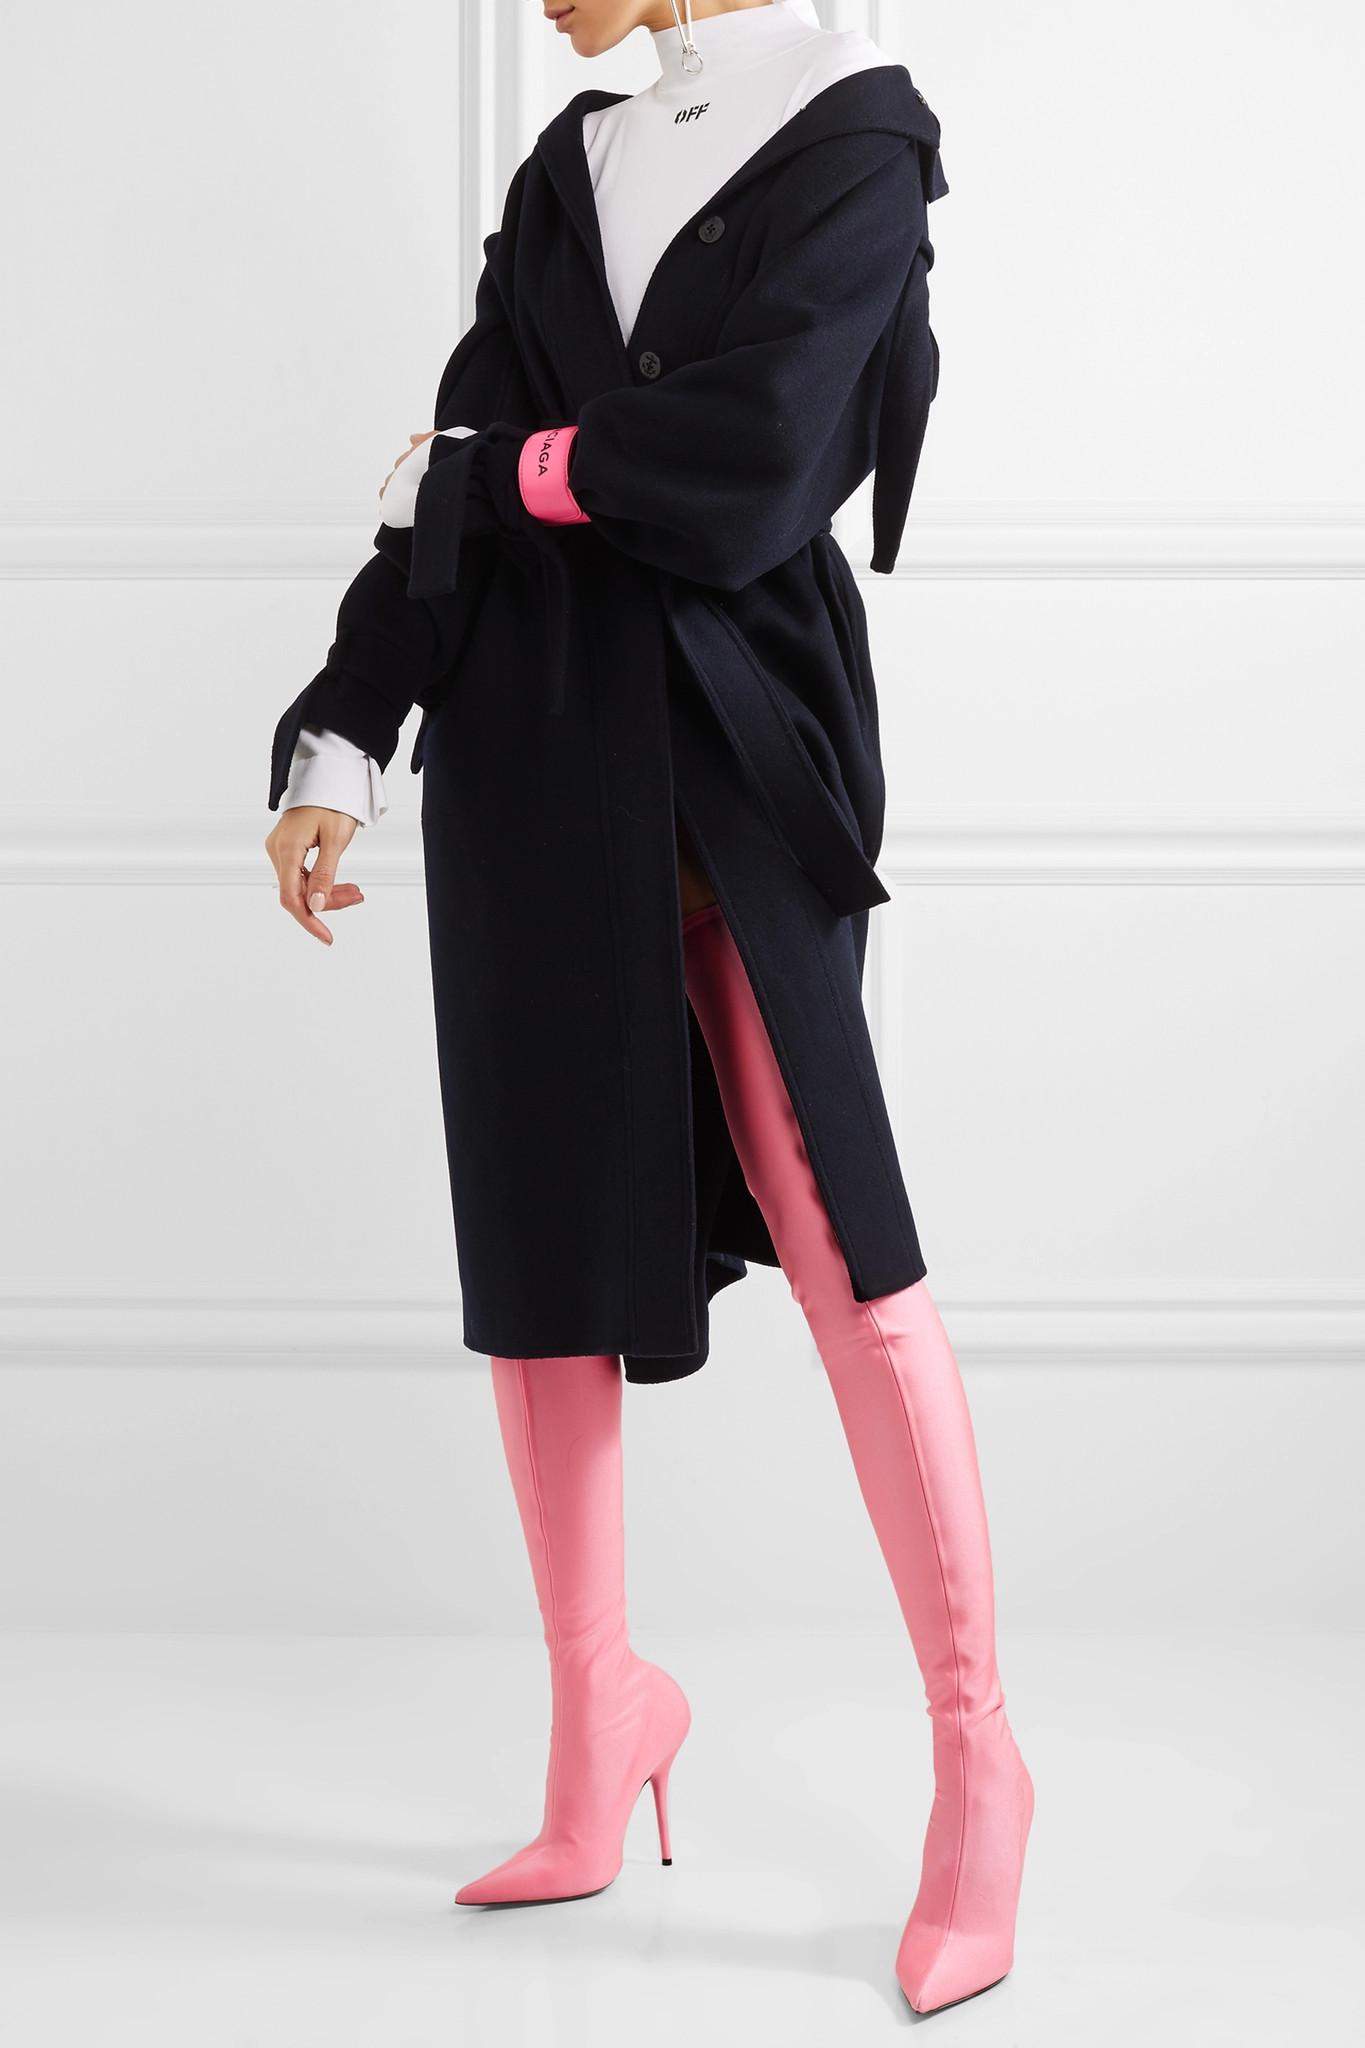 Spandex Thigh Boots in Bright Pink 